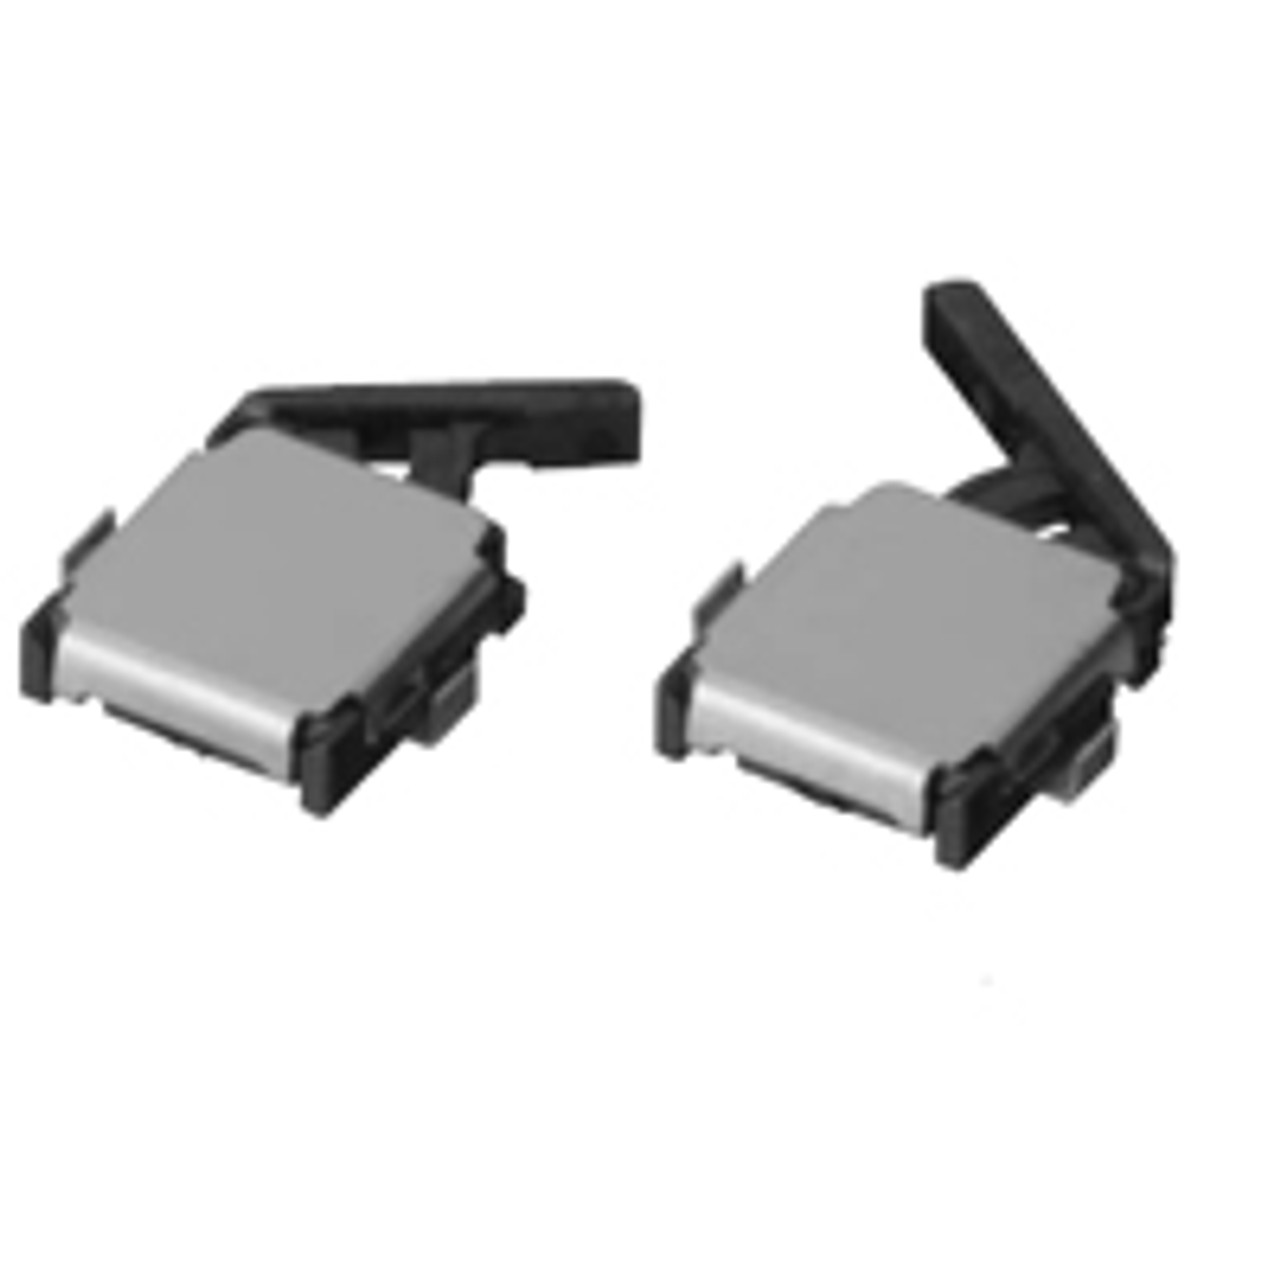 Omron D3SH-B0L1 Snap-Action Switches